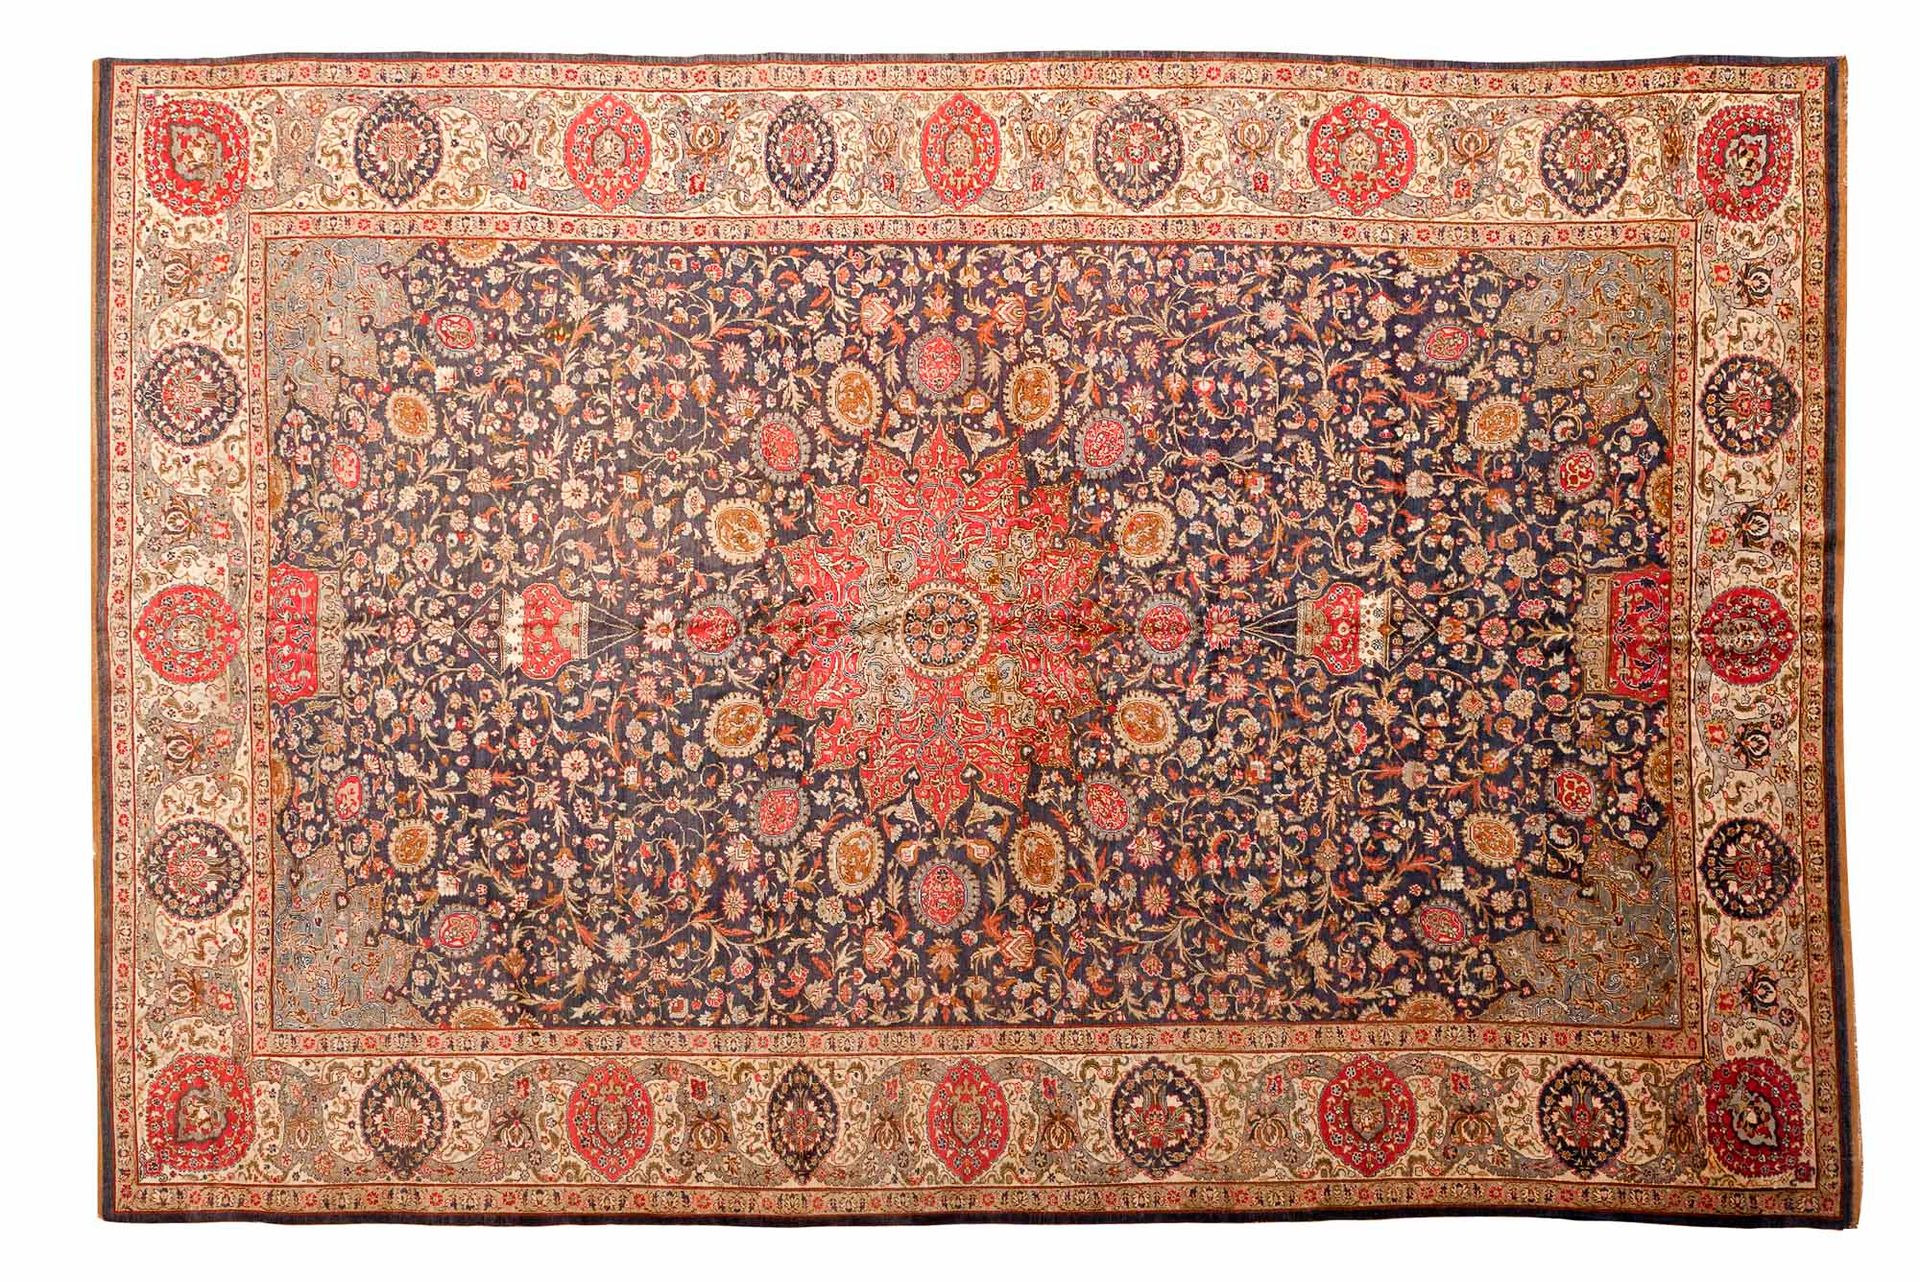 Null Tapis AMRITSAR (Inde), Fin du 19e siècle

Dimensions : 400 x 300cm.

Caract&hellip;